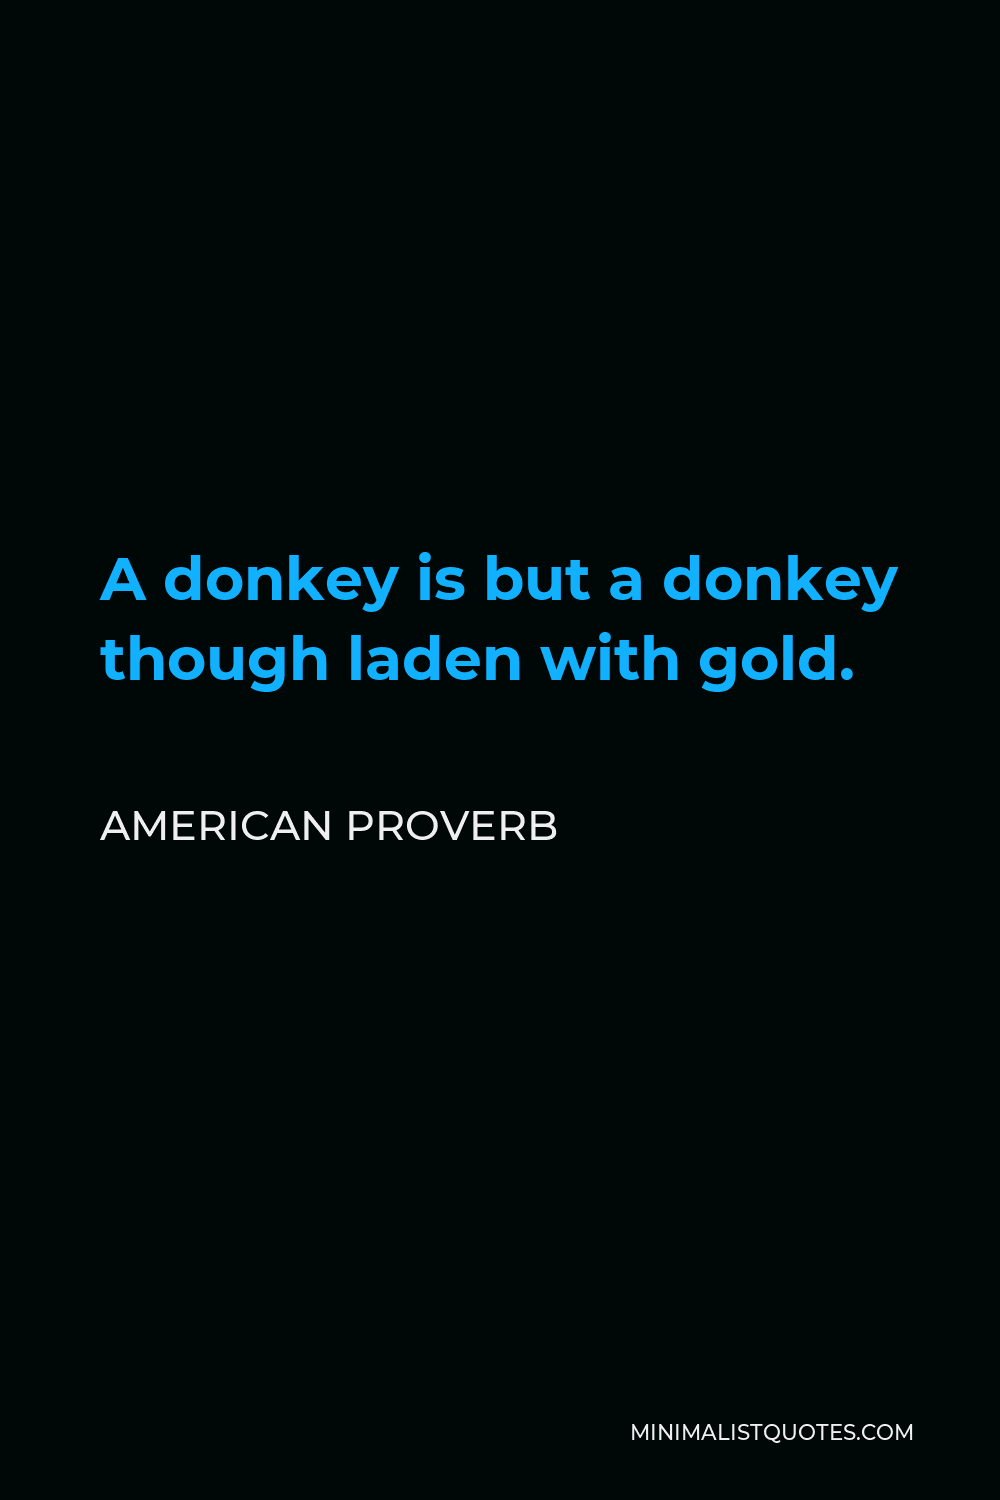 American Proverb Quote - A donkey is but a donkey though laden with gold.